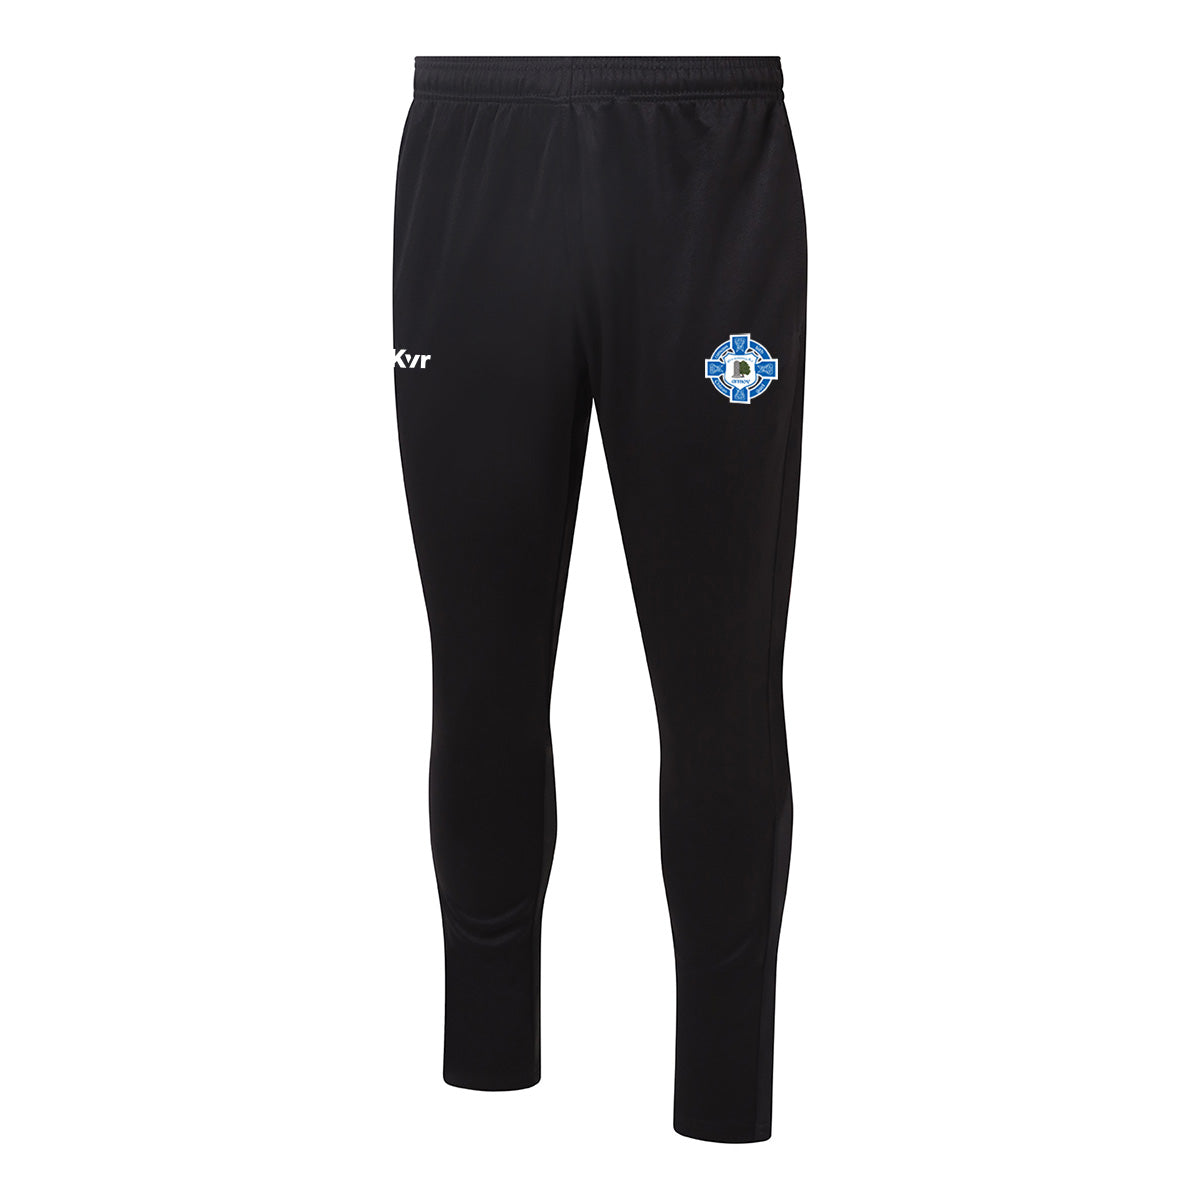 Mc Keever Glen Rovers Armoy Core 22 Skinny Pants - Youth - Black